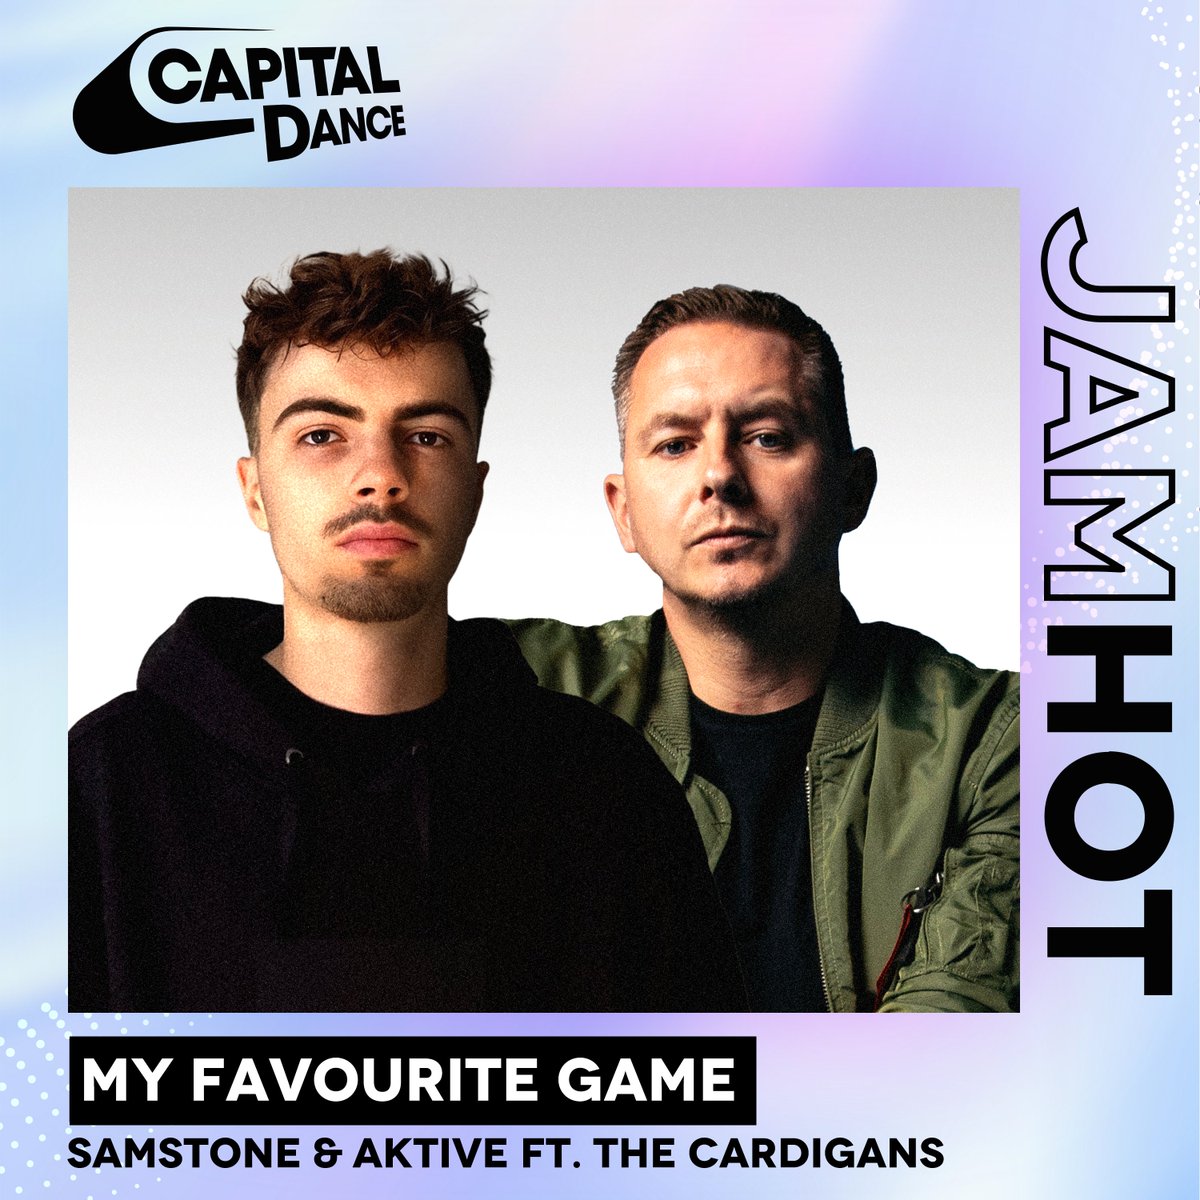 The Cardigans classic ‘My Favourite Game’ gets some DNB magic 🤩⚠️ @Samstonednb @Aktive_uk